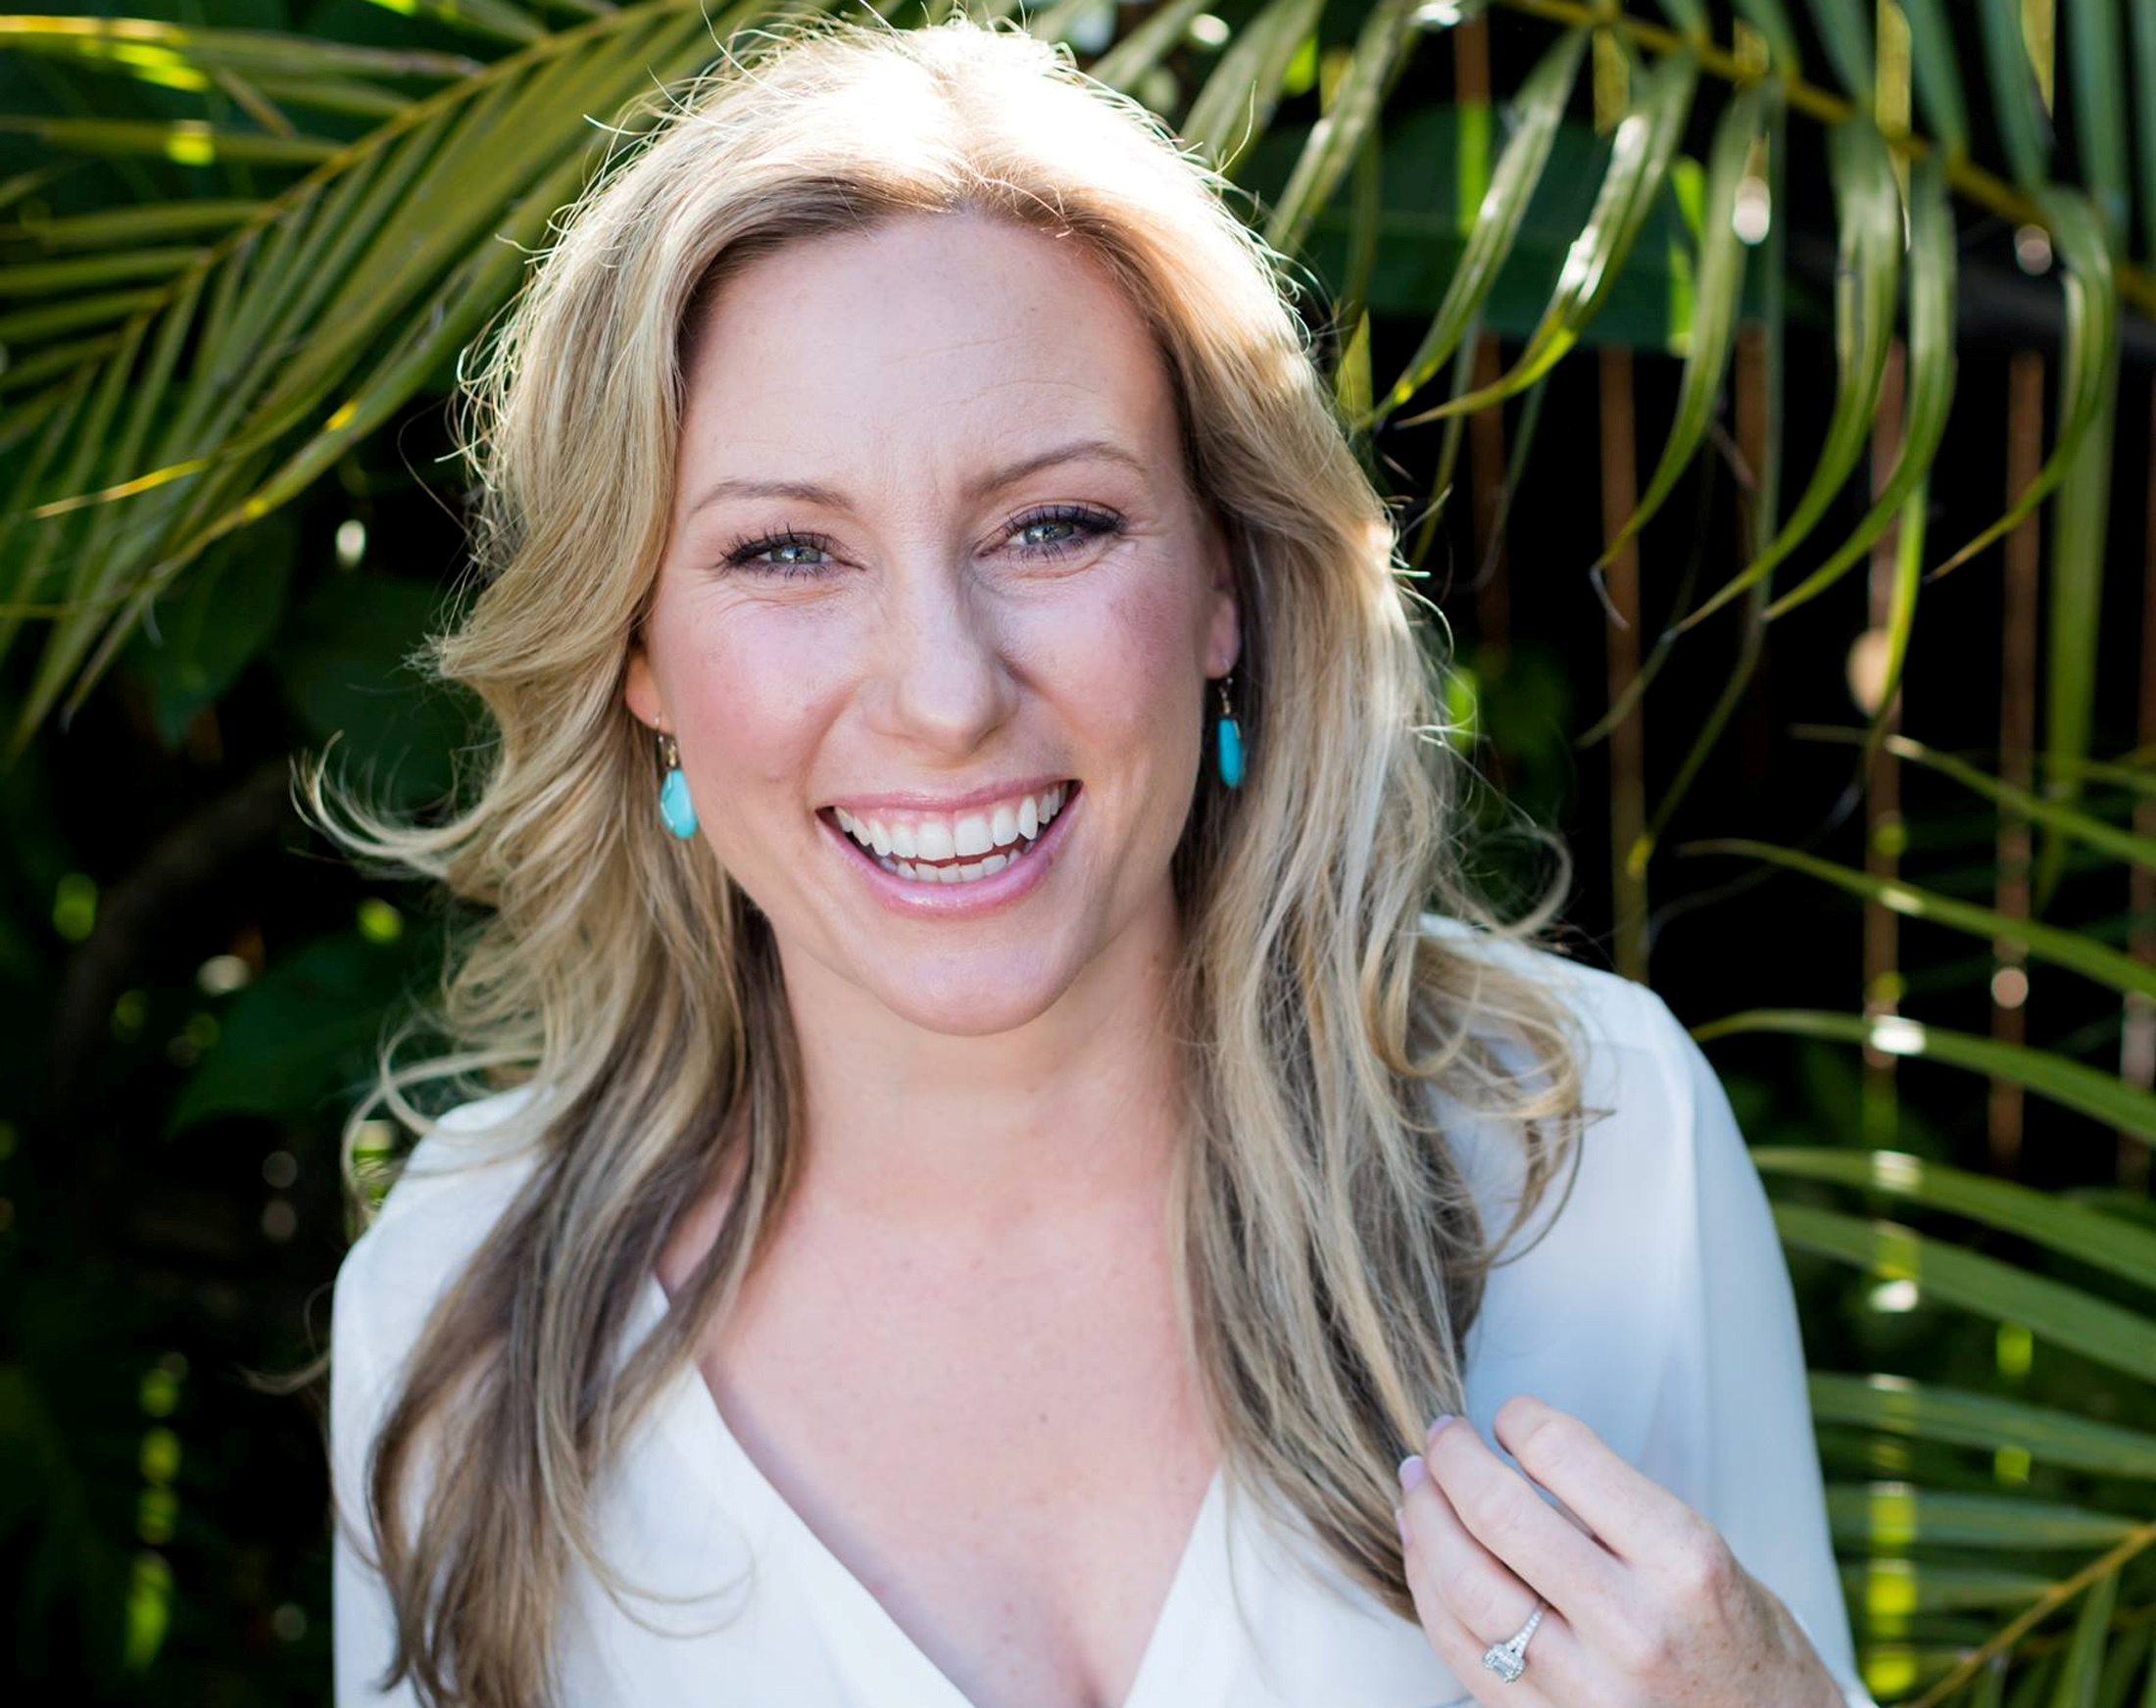 PHOTO: Justine Damond, also known as Justine Ruszczyk, from Sydney, is seen in this 2015 photo released by Stephen Govel Photography in New York.